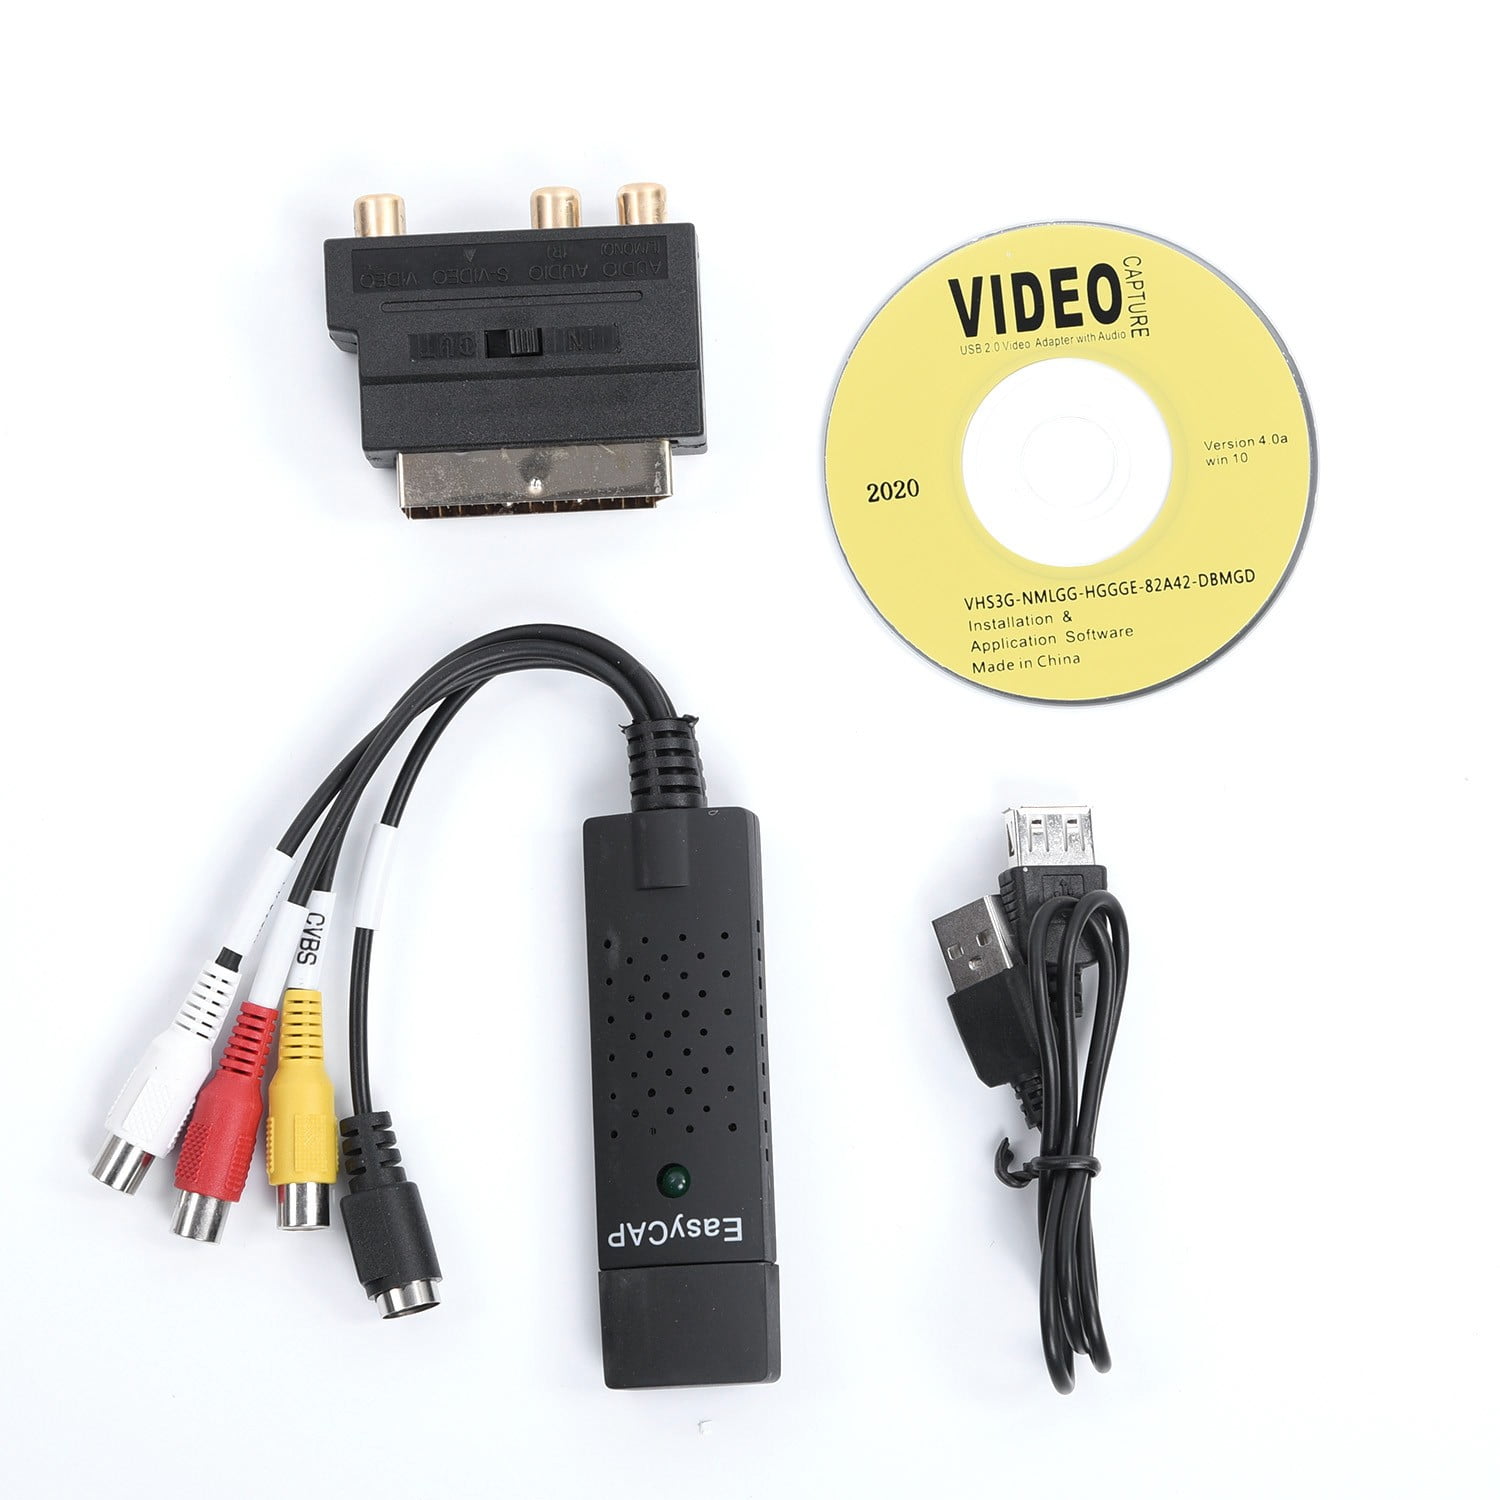 Romance fuzzy design USB VHS To DVD Video-Converter Capture Full-Scart Set With Cable For  Windows - Walmart.com